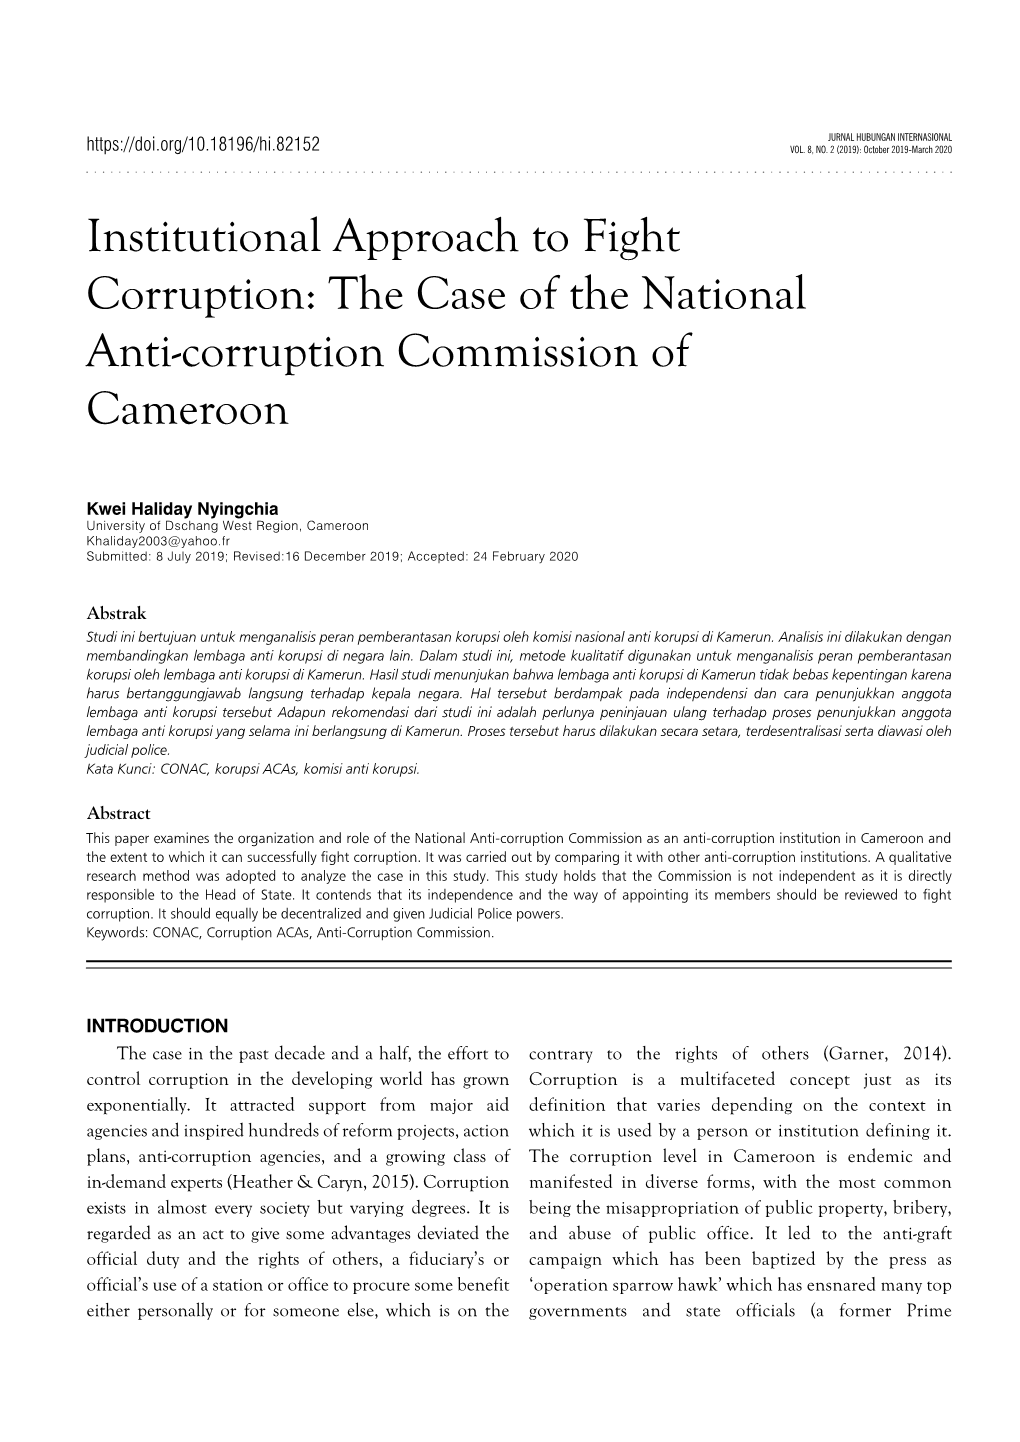 Institutional Approach to Fight Corruption: the Case of the National Anti-Corruption Commission of Cameroon